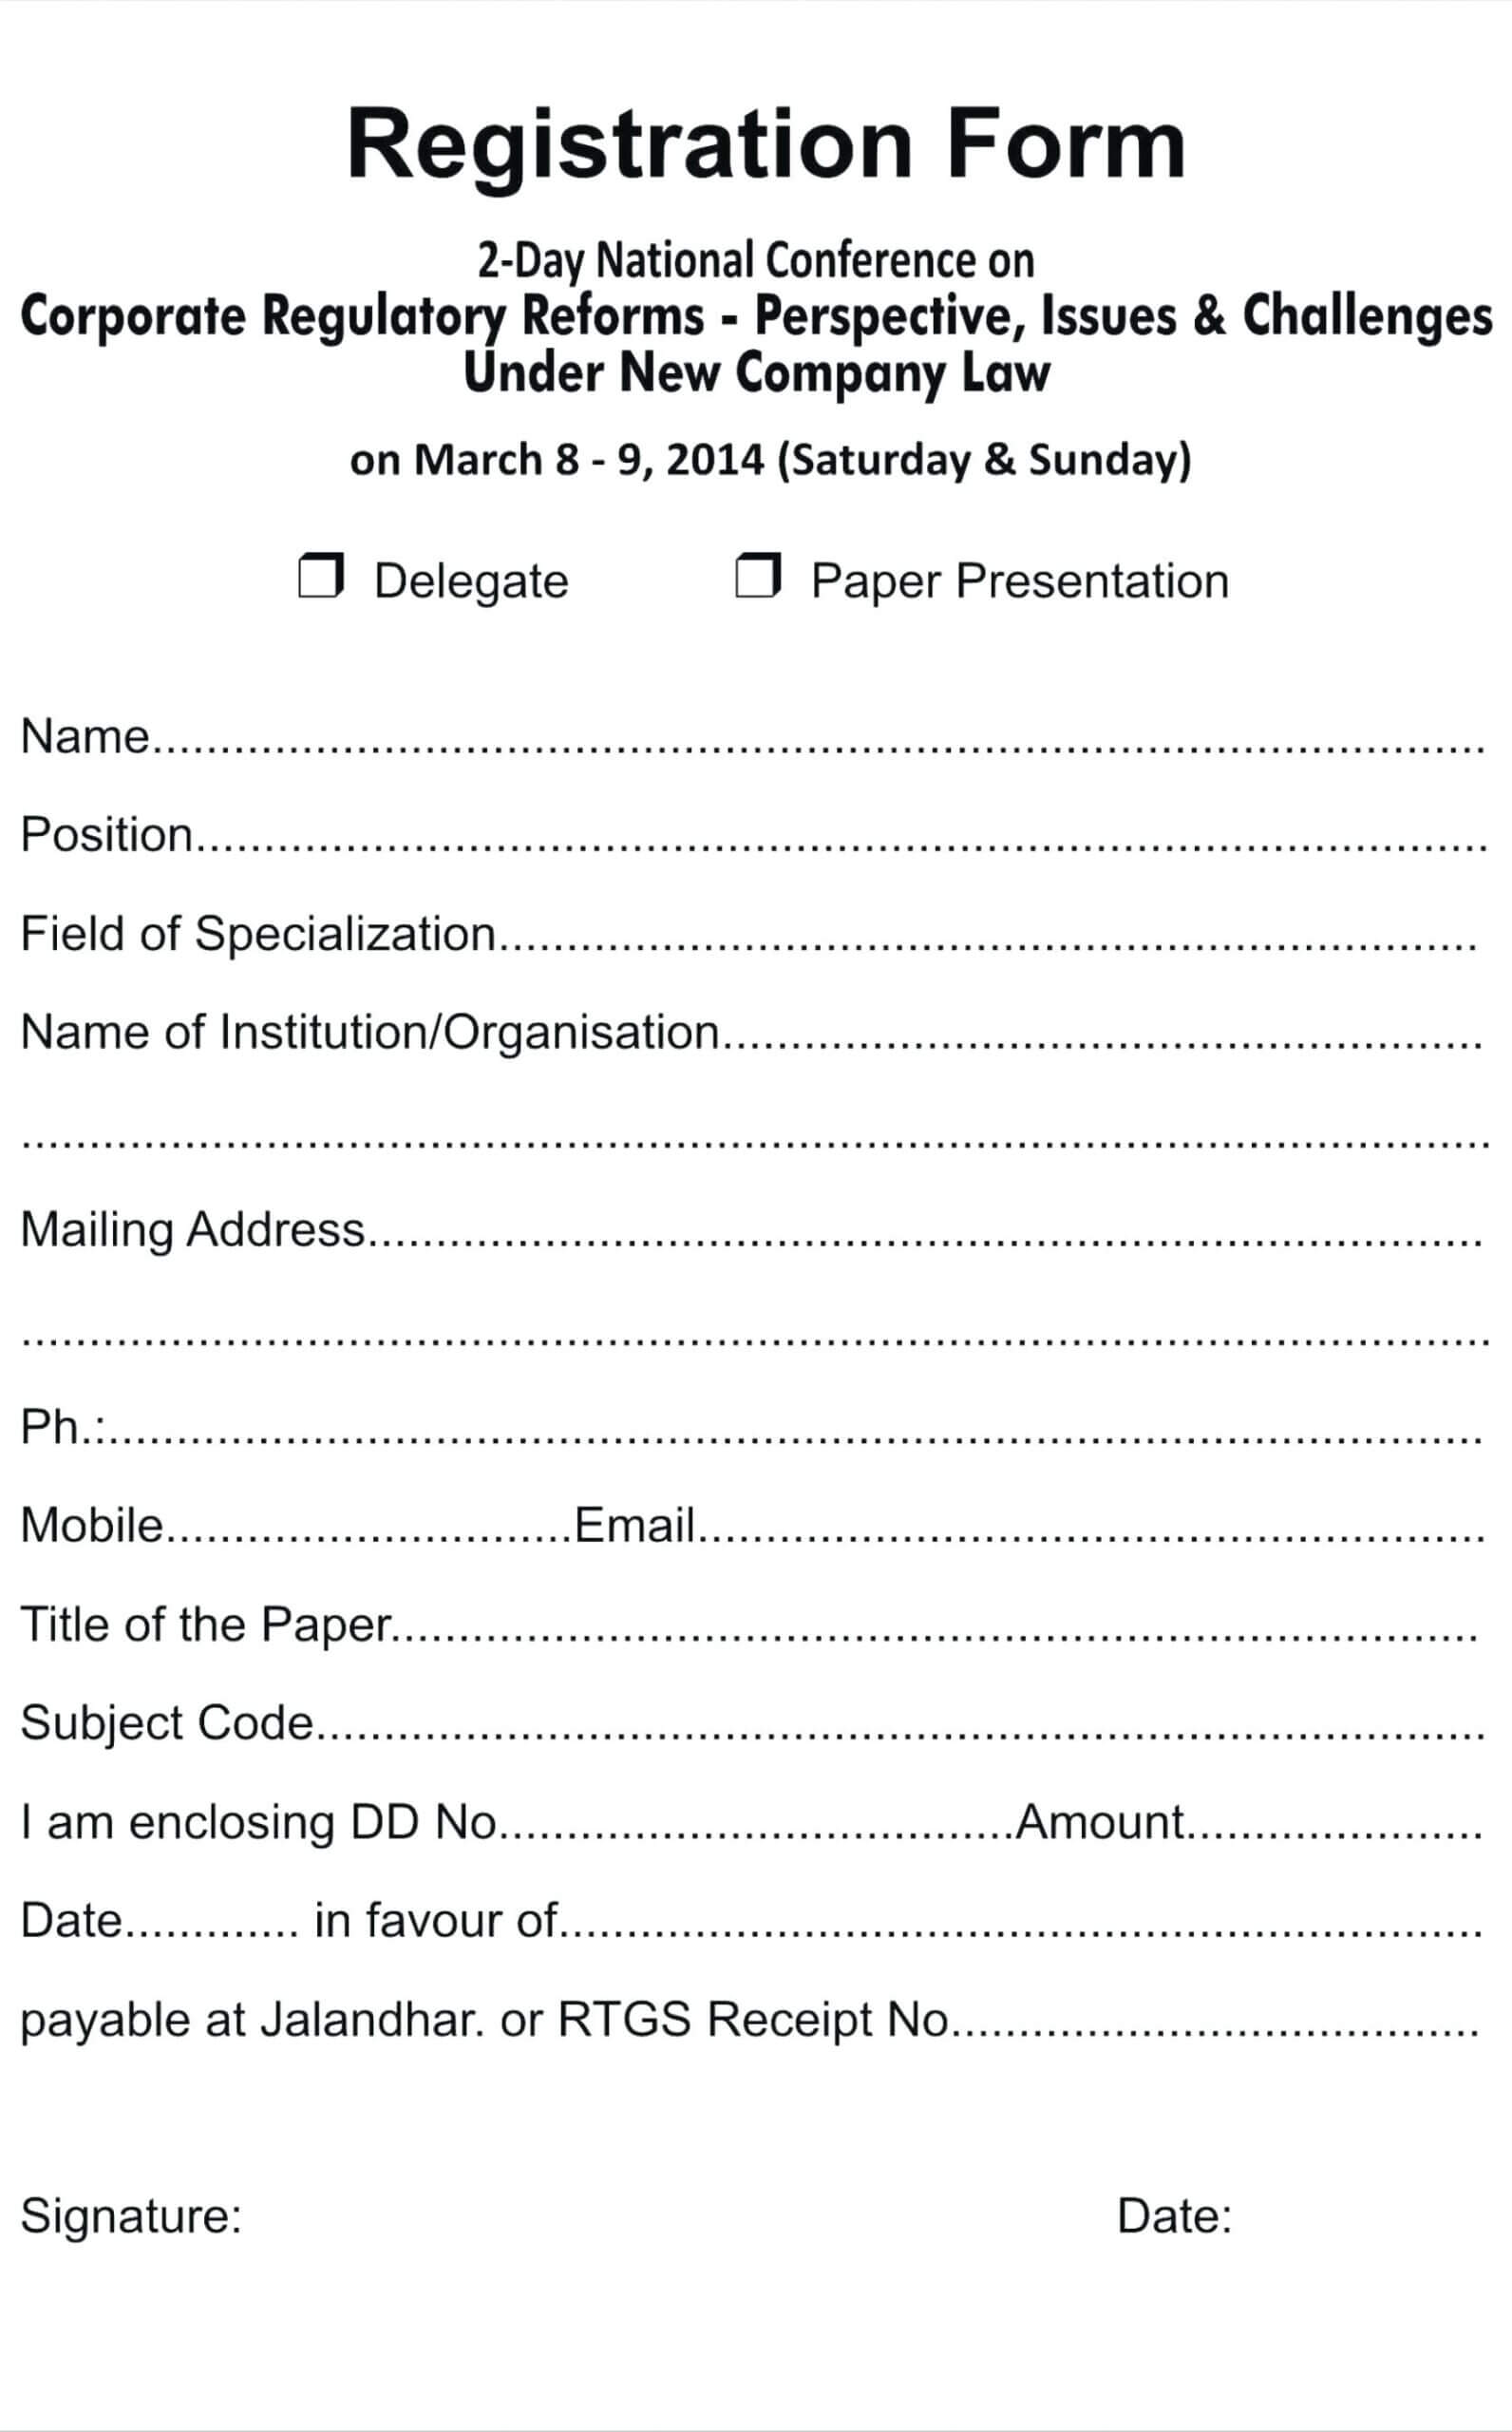 Registration Form Template Doc – Forza.mbiconsultingltd Regarding Seminar Registration Form Template Word